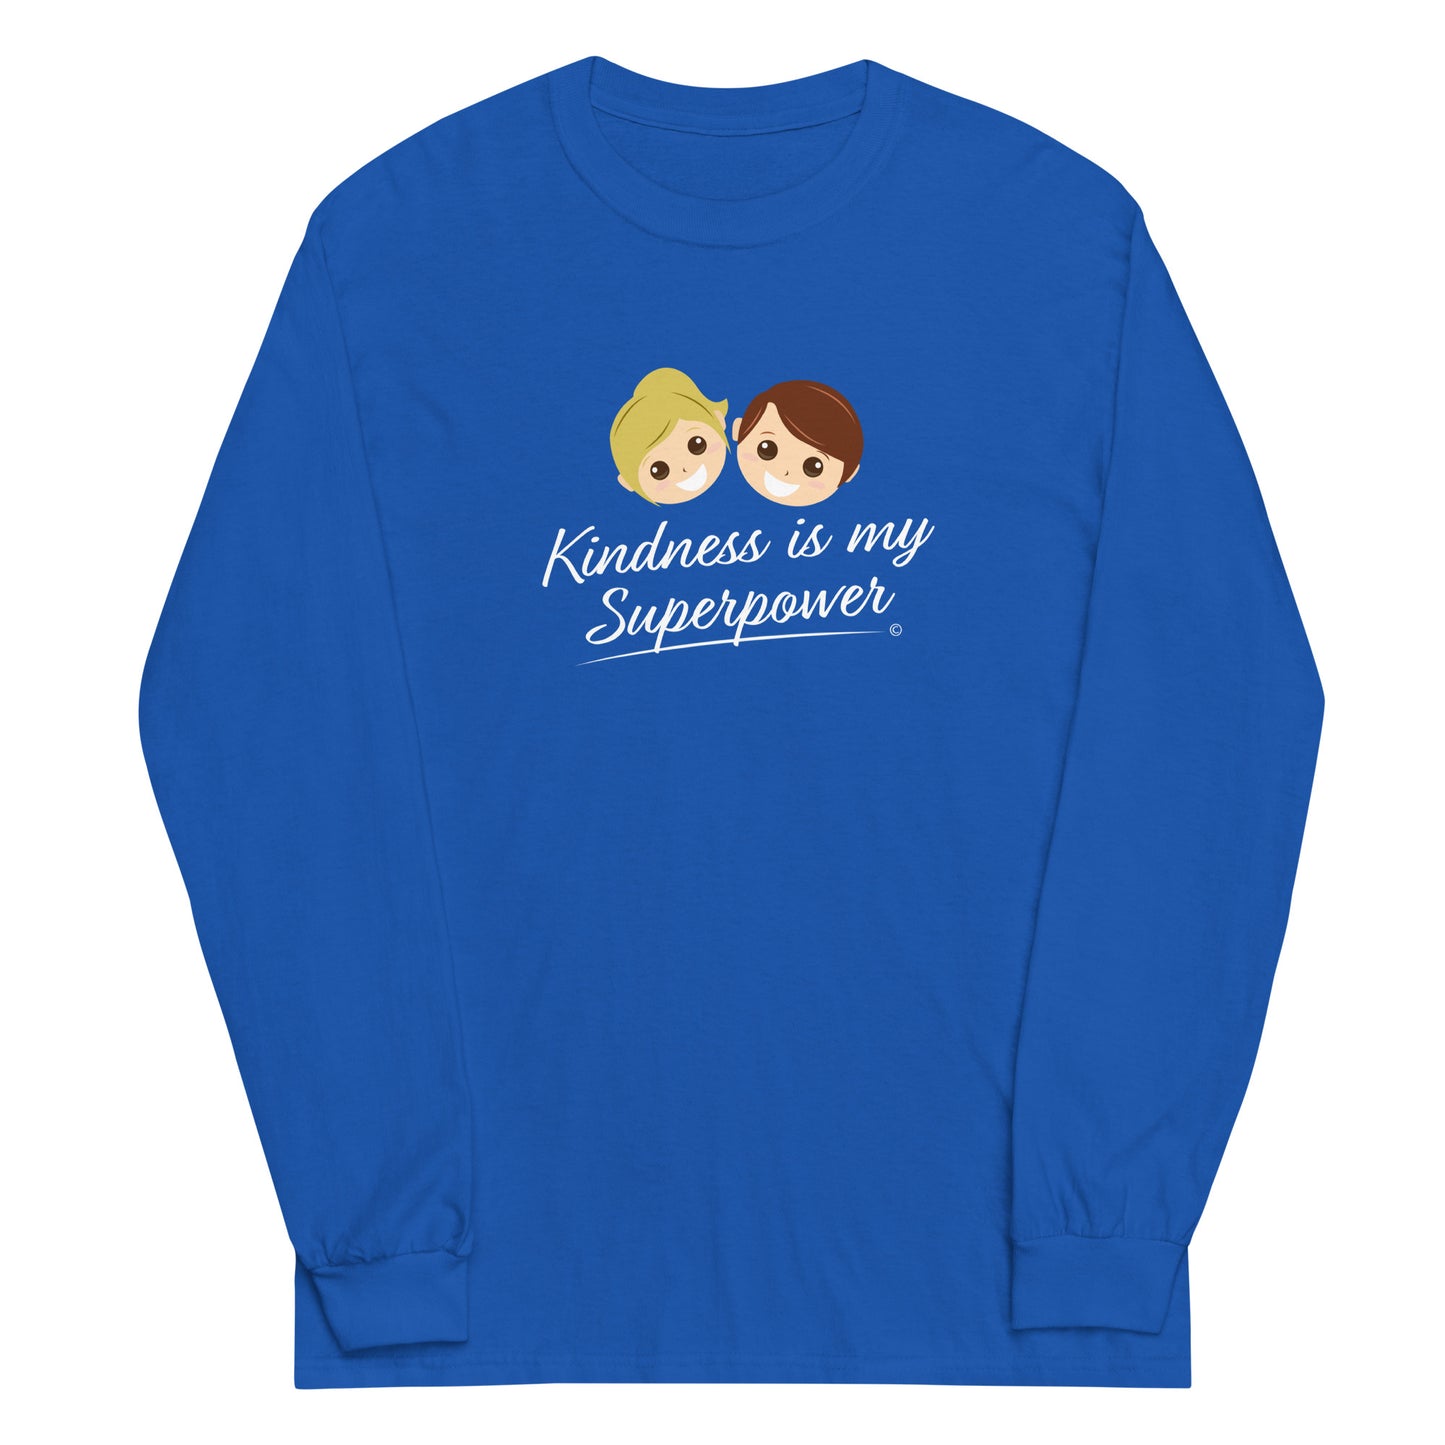 A stylish long sleeve shirt in royal blue featuring the empowering quote 'Kindness is my Superpower' in bold lettering.